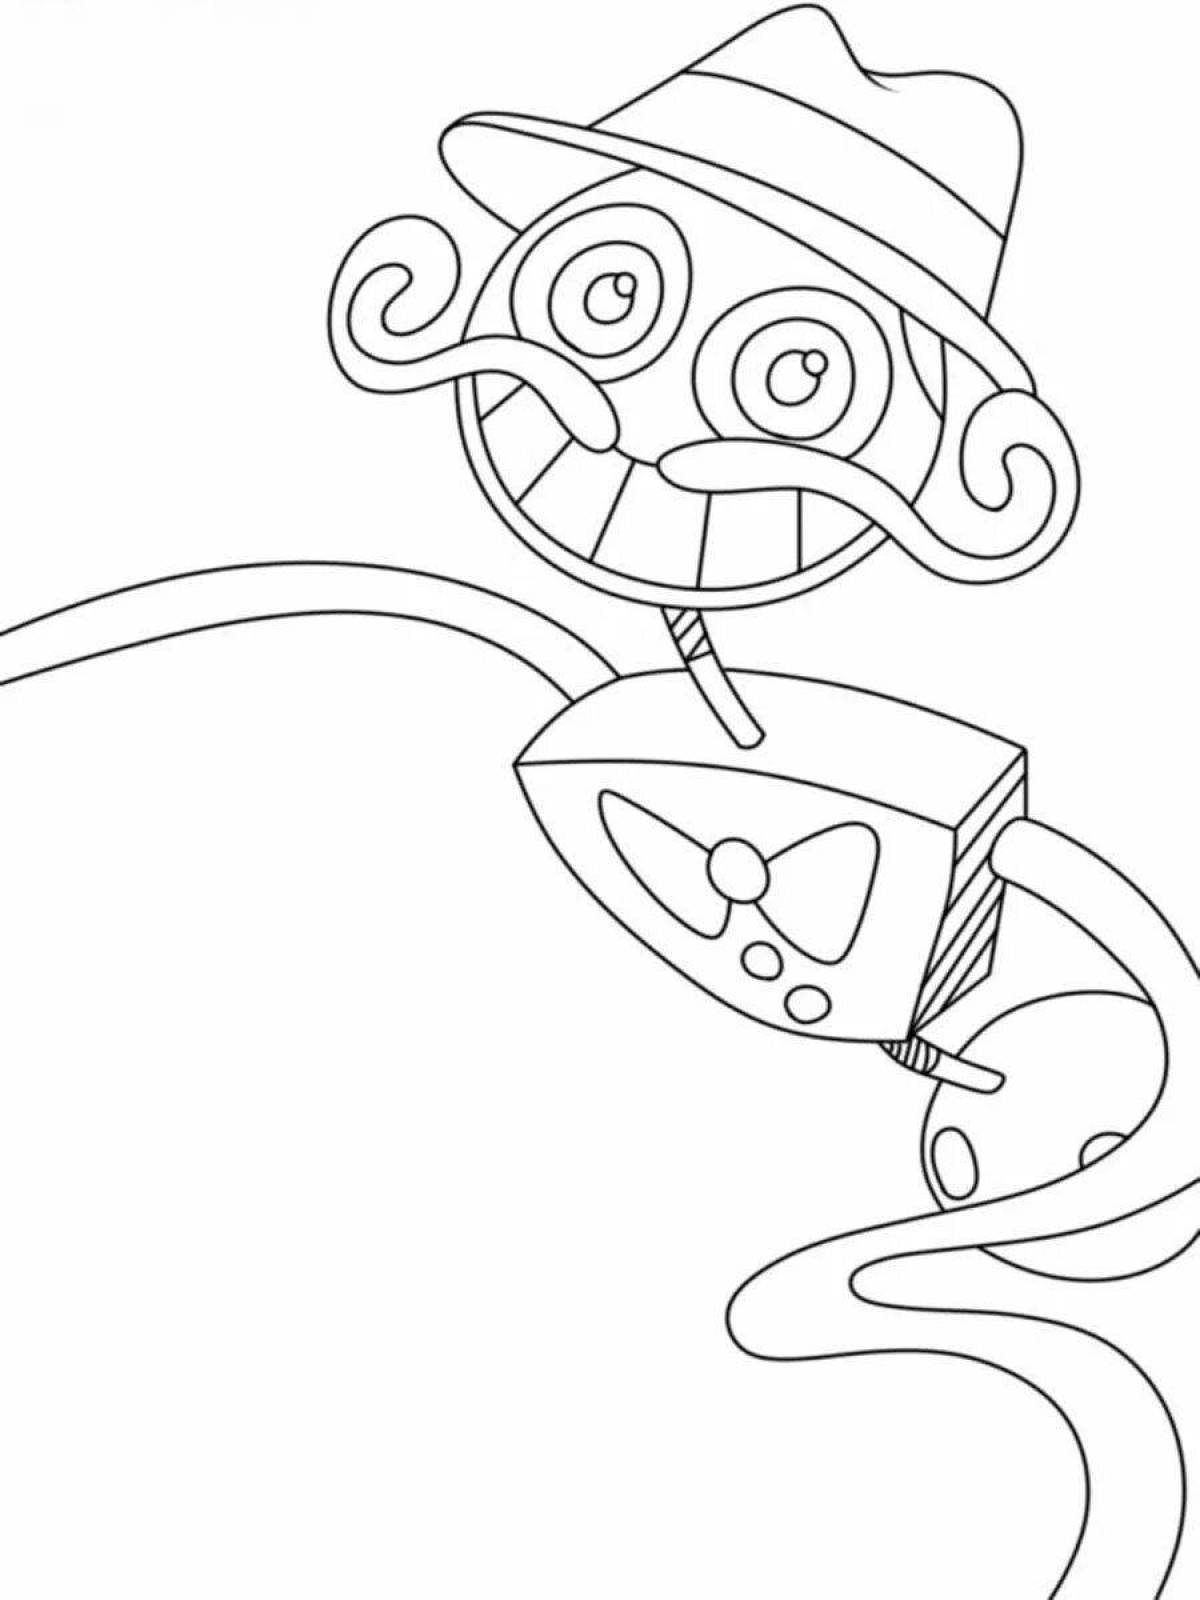 Coloring page glamor daddy with long legs